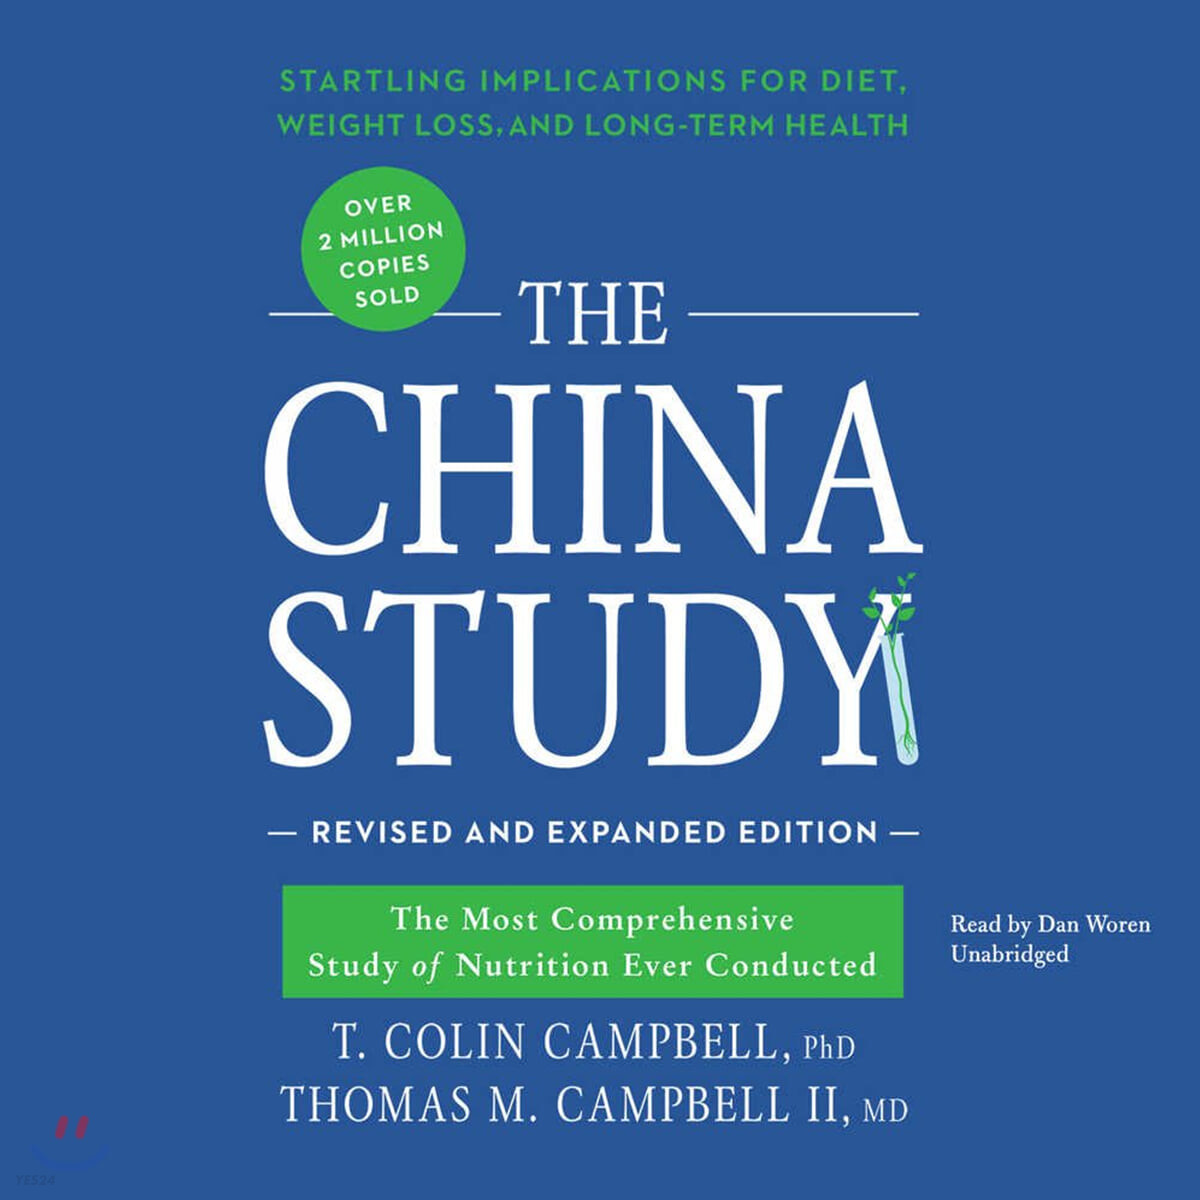 The China Study, Revised and Expanded Edition: The Most Comprehensive Study of Nutrition Ever Conducted and the Startling Implications for Diet, Weigh (Startling Implications for Diet, Weight Loss, and Long-term Health)